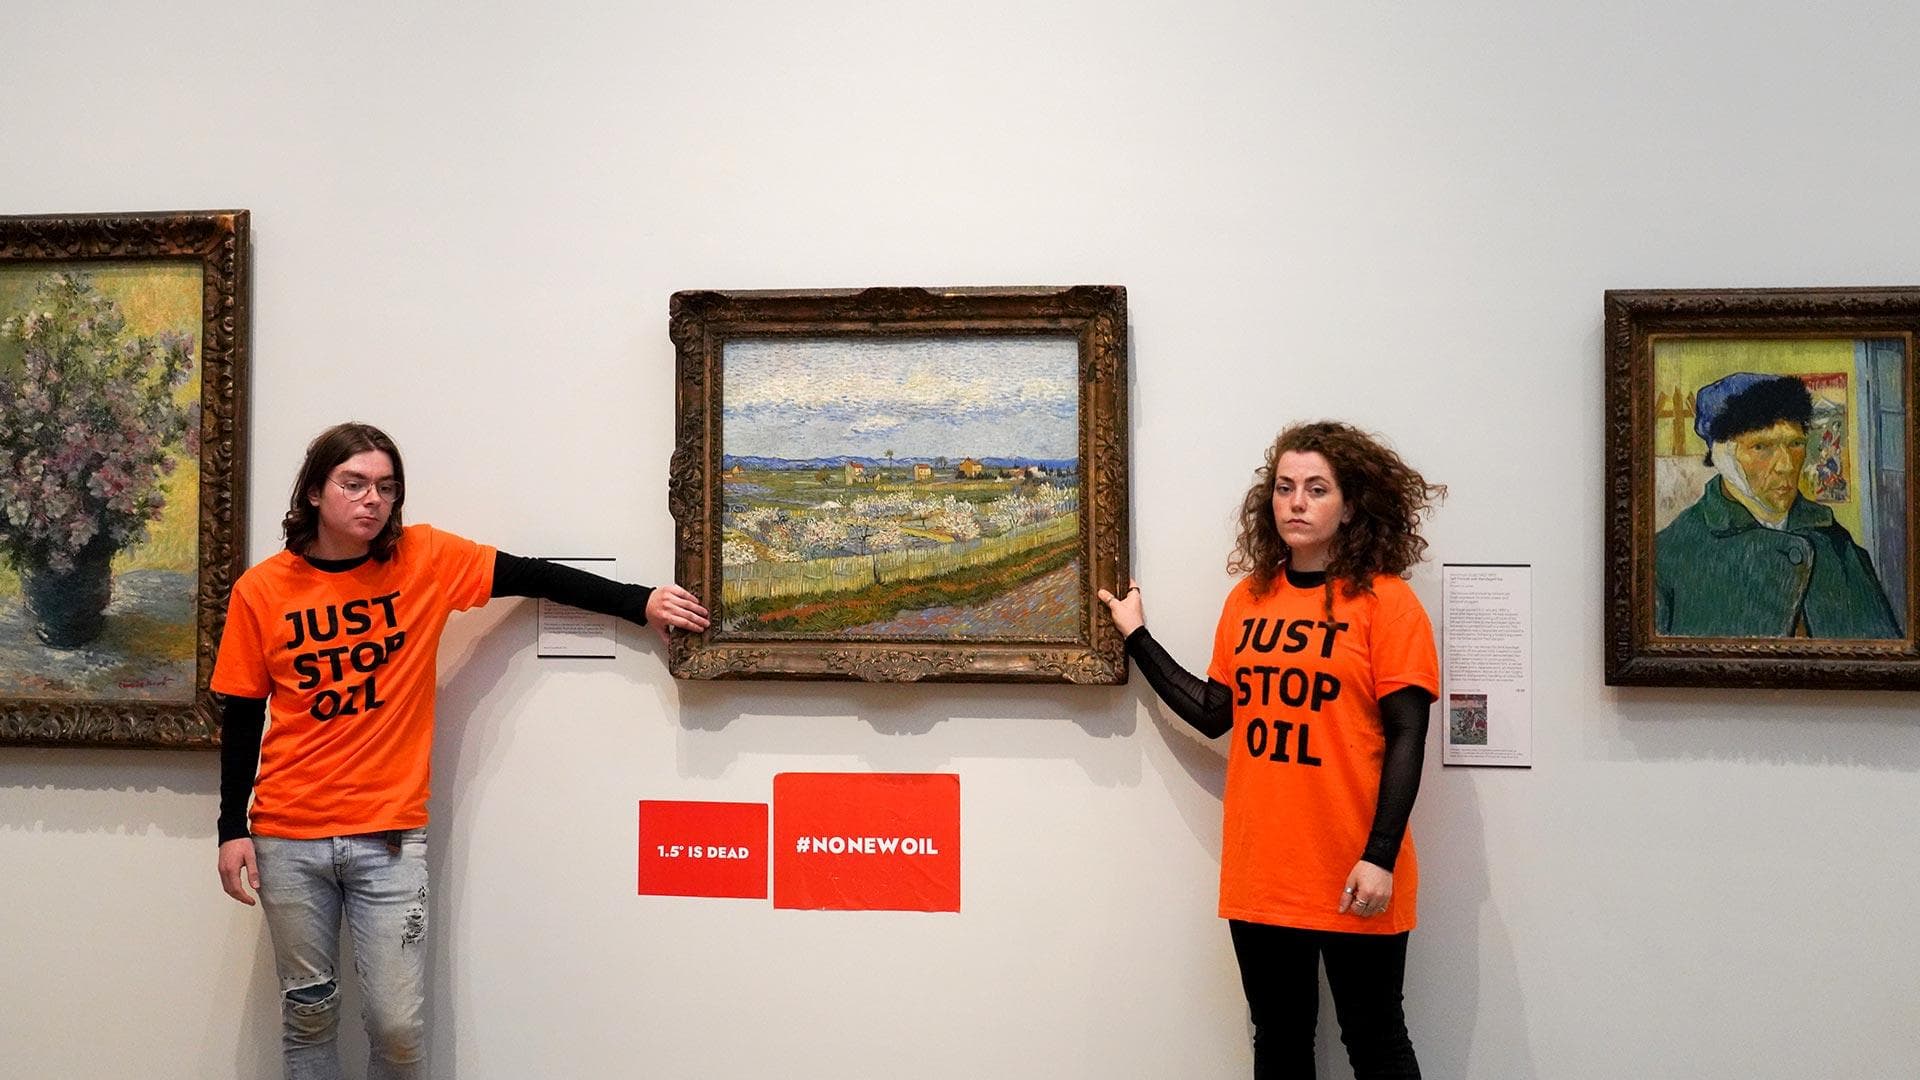 Two people with orange "Just Stop Oil" T-shirts glue their hands to a Van Gogh painting